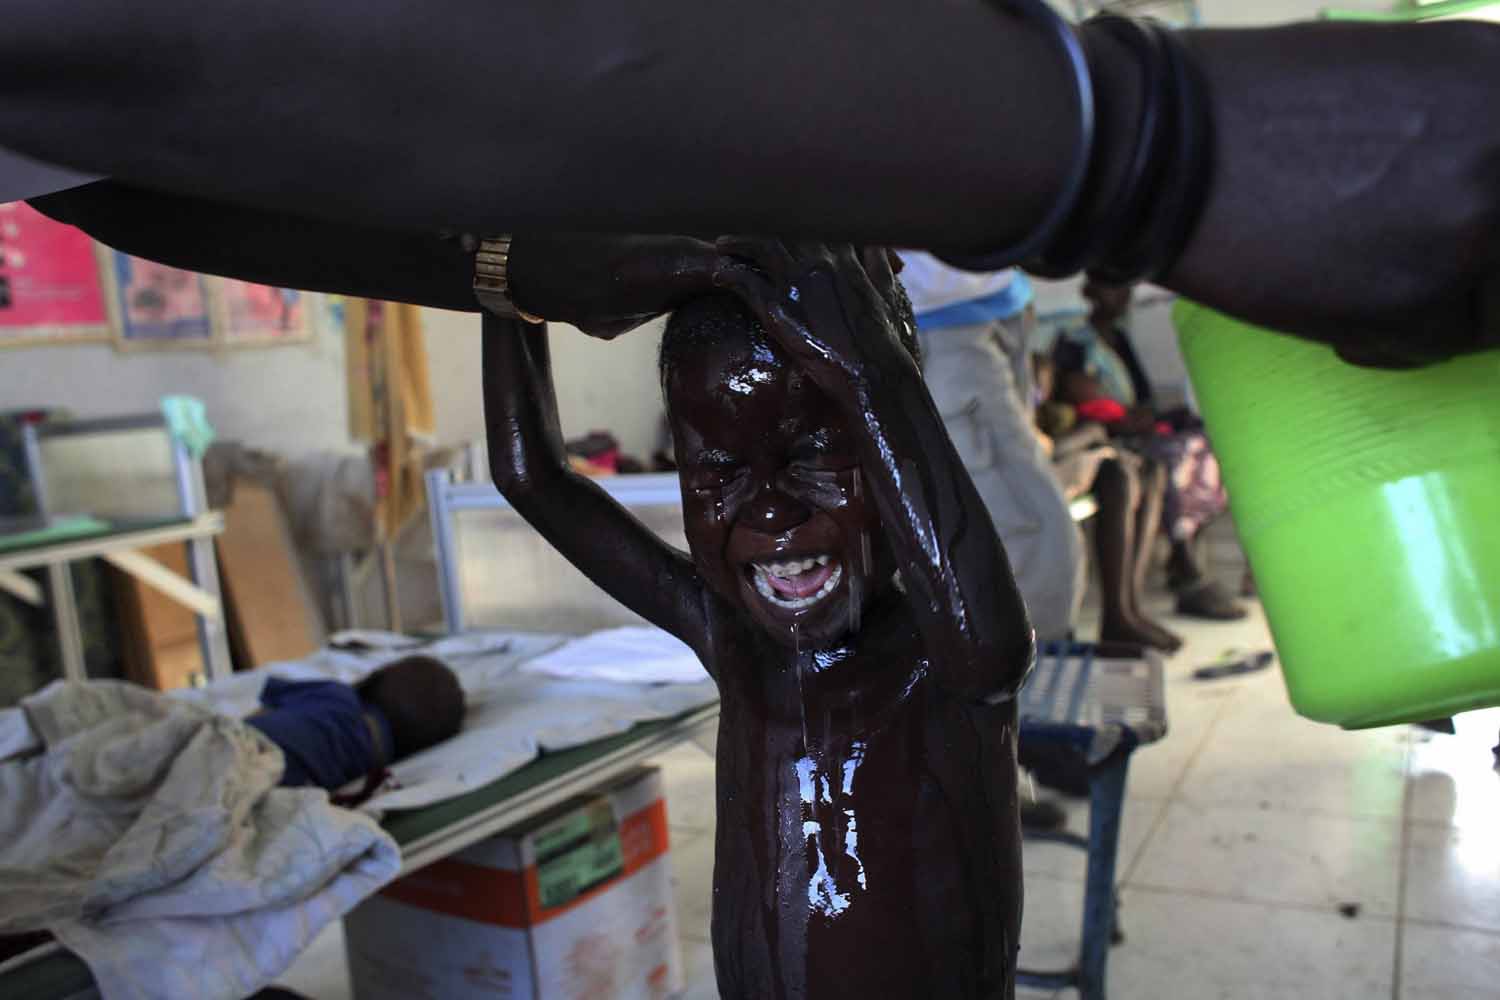 May 28, 2014. A South Sudanese child displaced by the fighting in Malakal, and suffering from malnutrition, cries as he is washed by a nurse at a feeding centre run by Medicins sans Frontiers (MSF) in Kodok, Fashoda county, South Sudan.